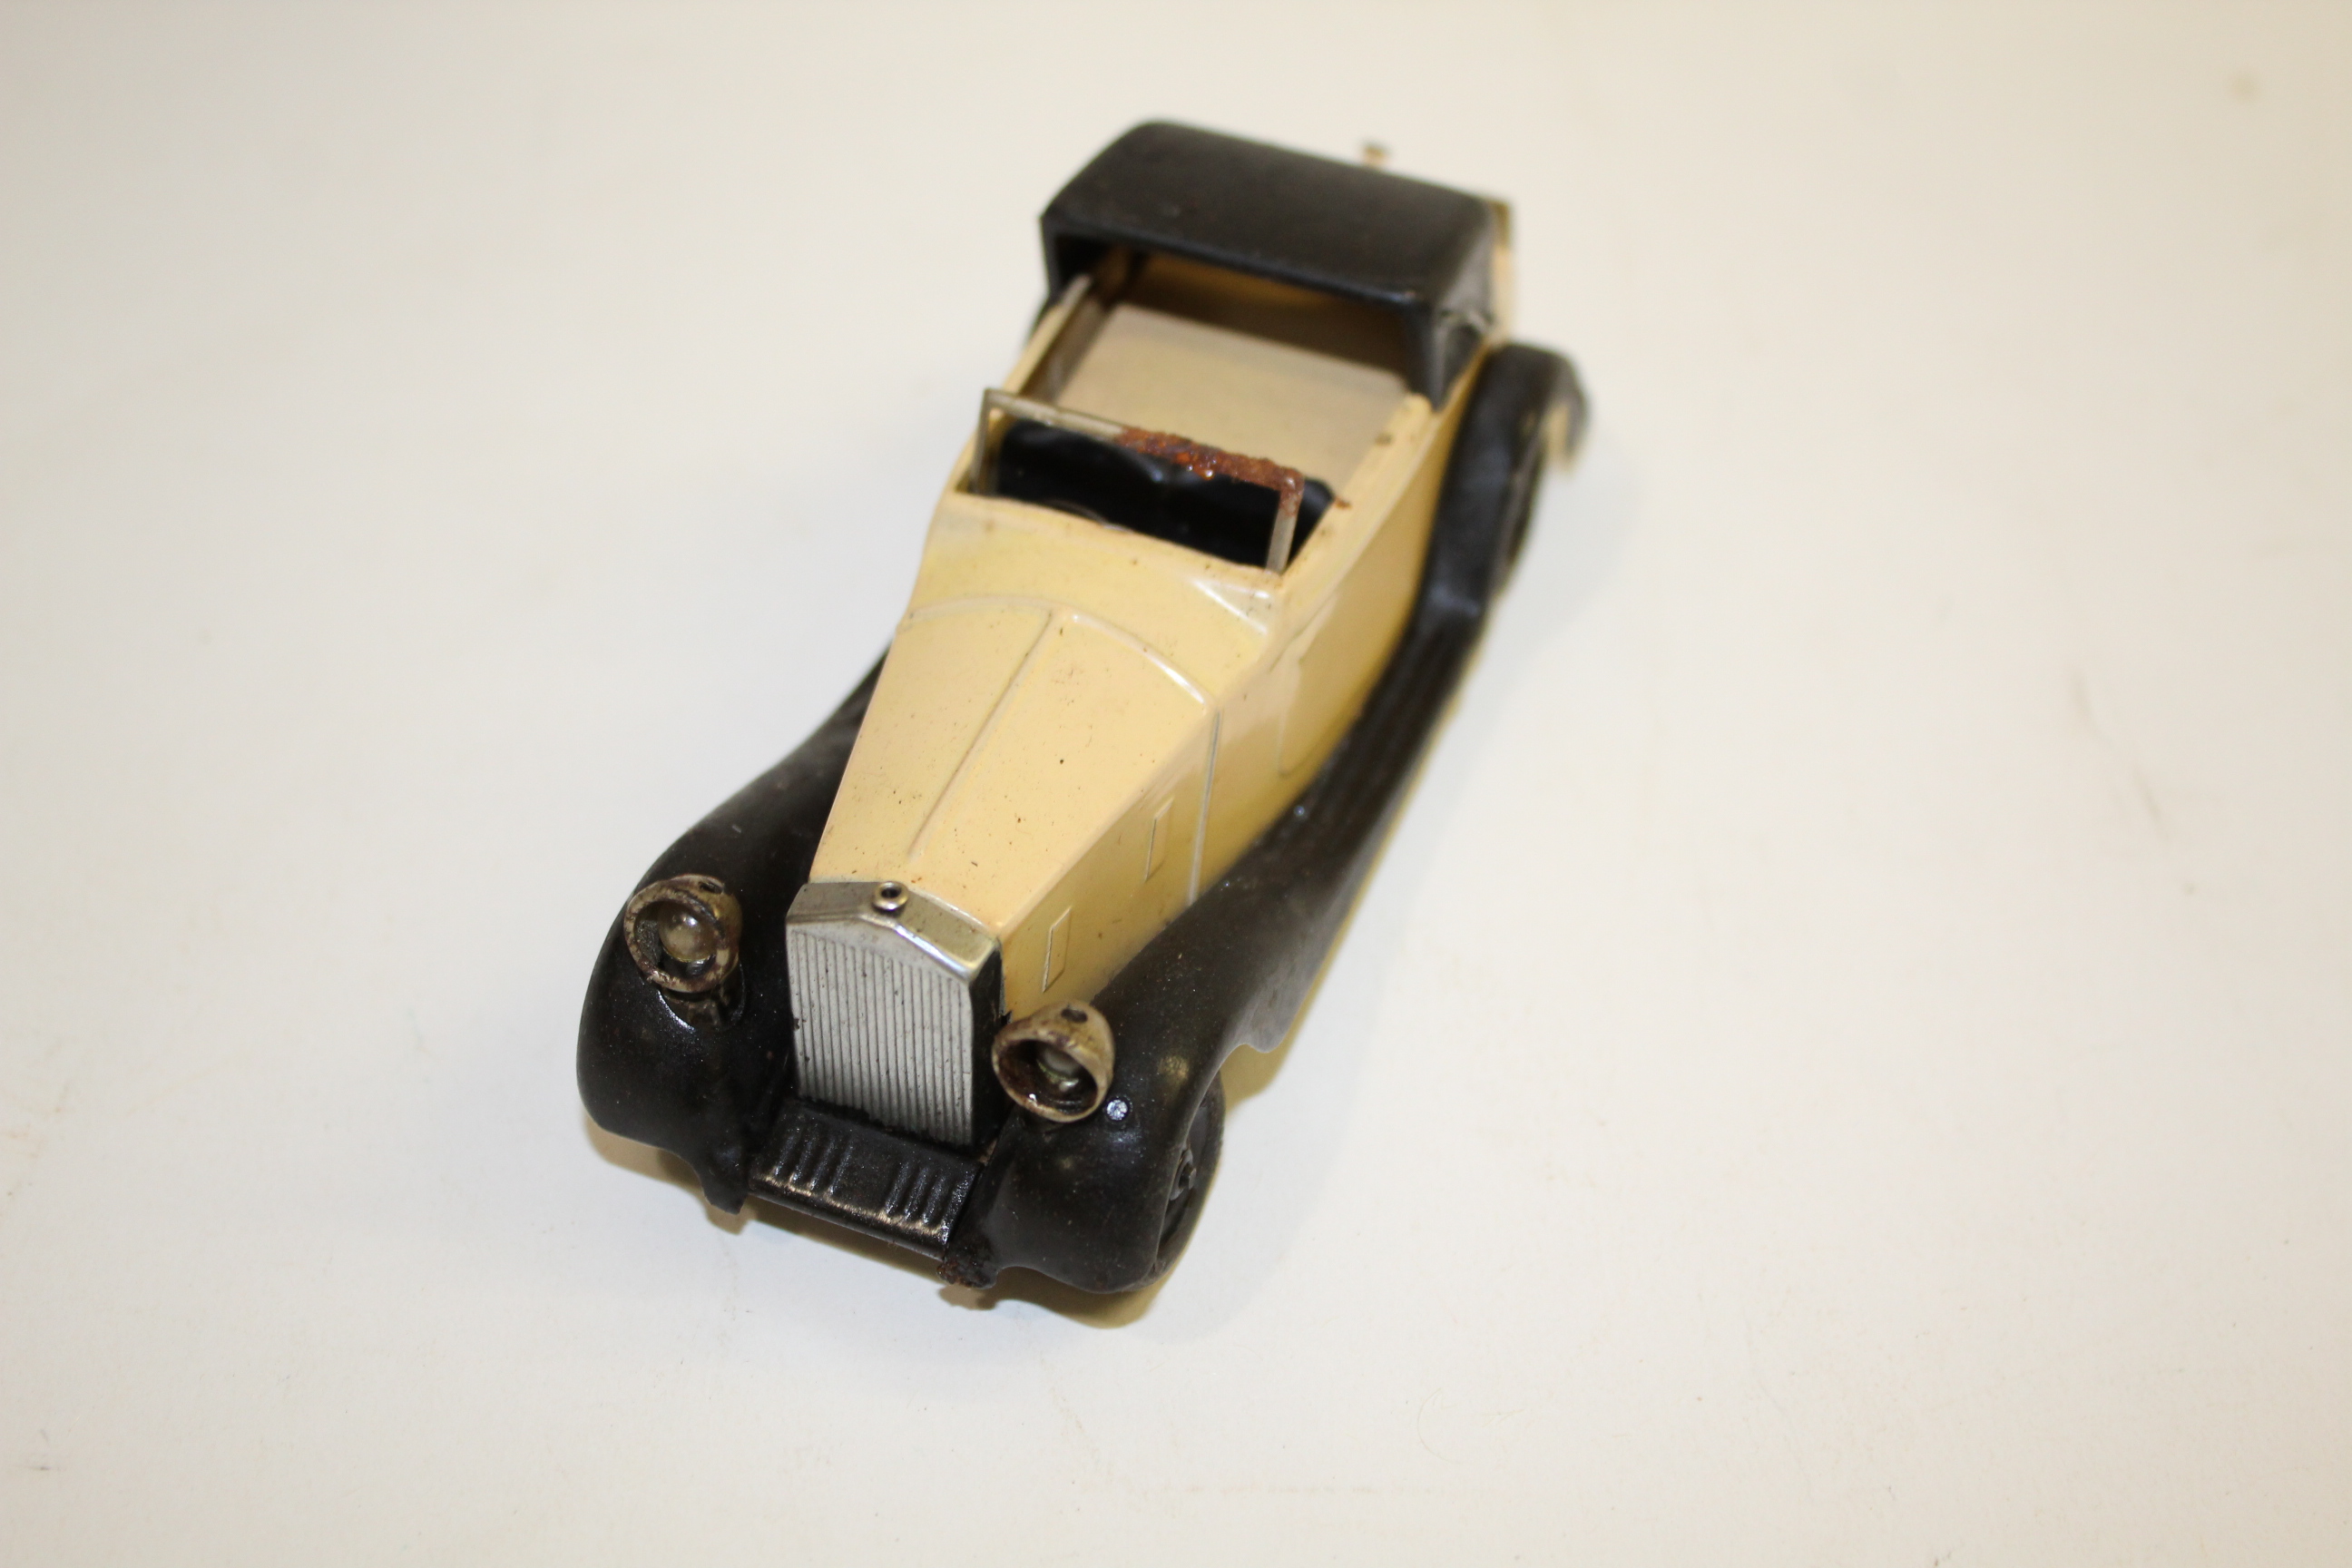 RARE TRIANG MINIC ROLLS ROYCE SEDANCA - ELECTRIC HEADLAMPS Model No 50M, with a black hood and wings - Image 6 of 14